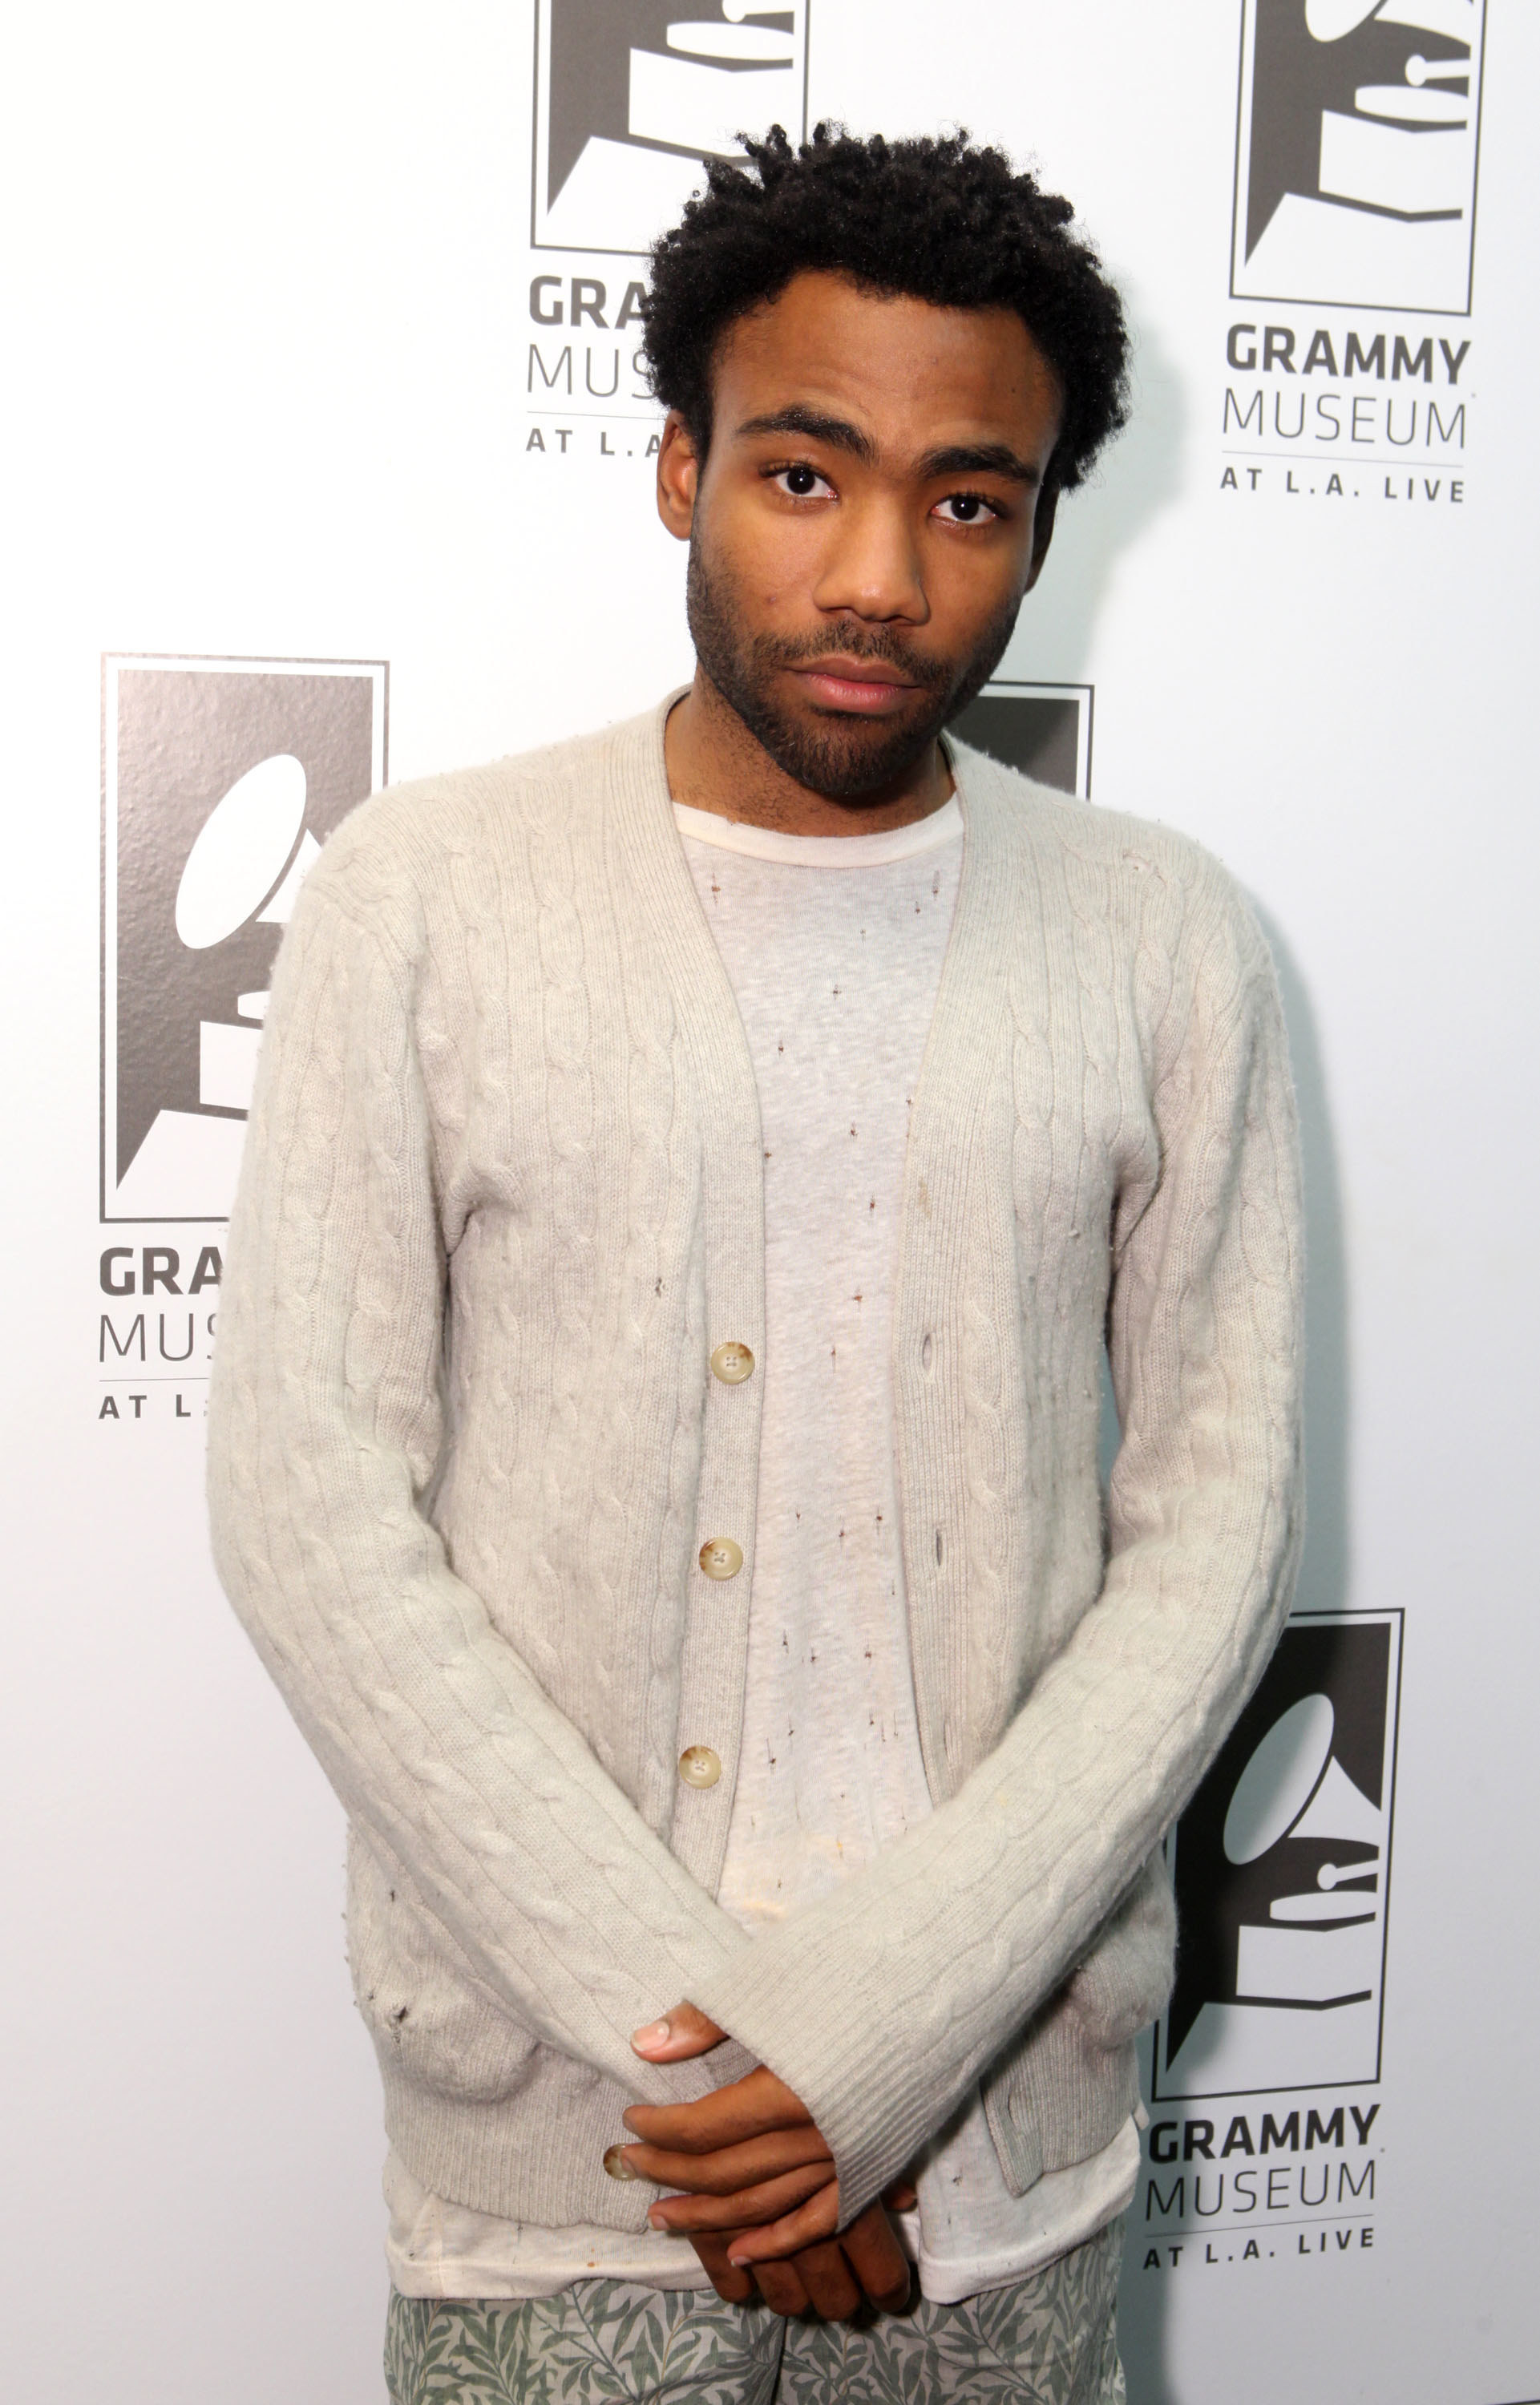 Donald Glover on the red carpet